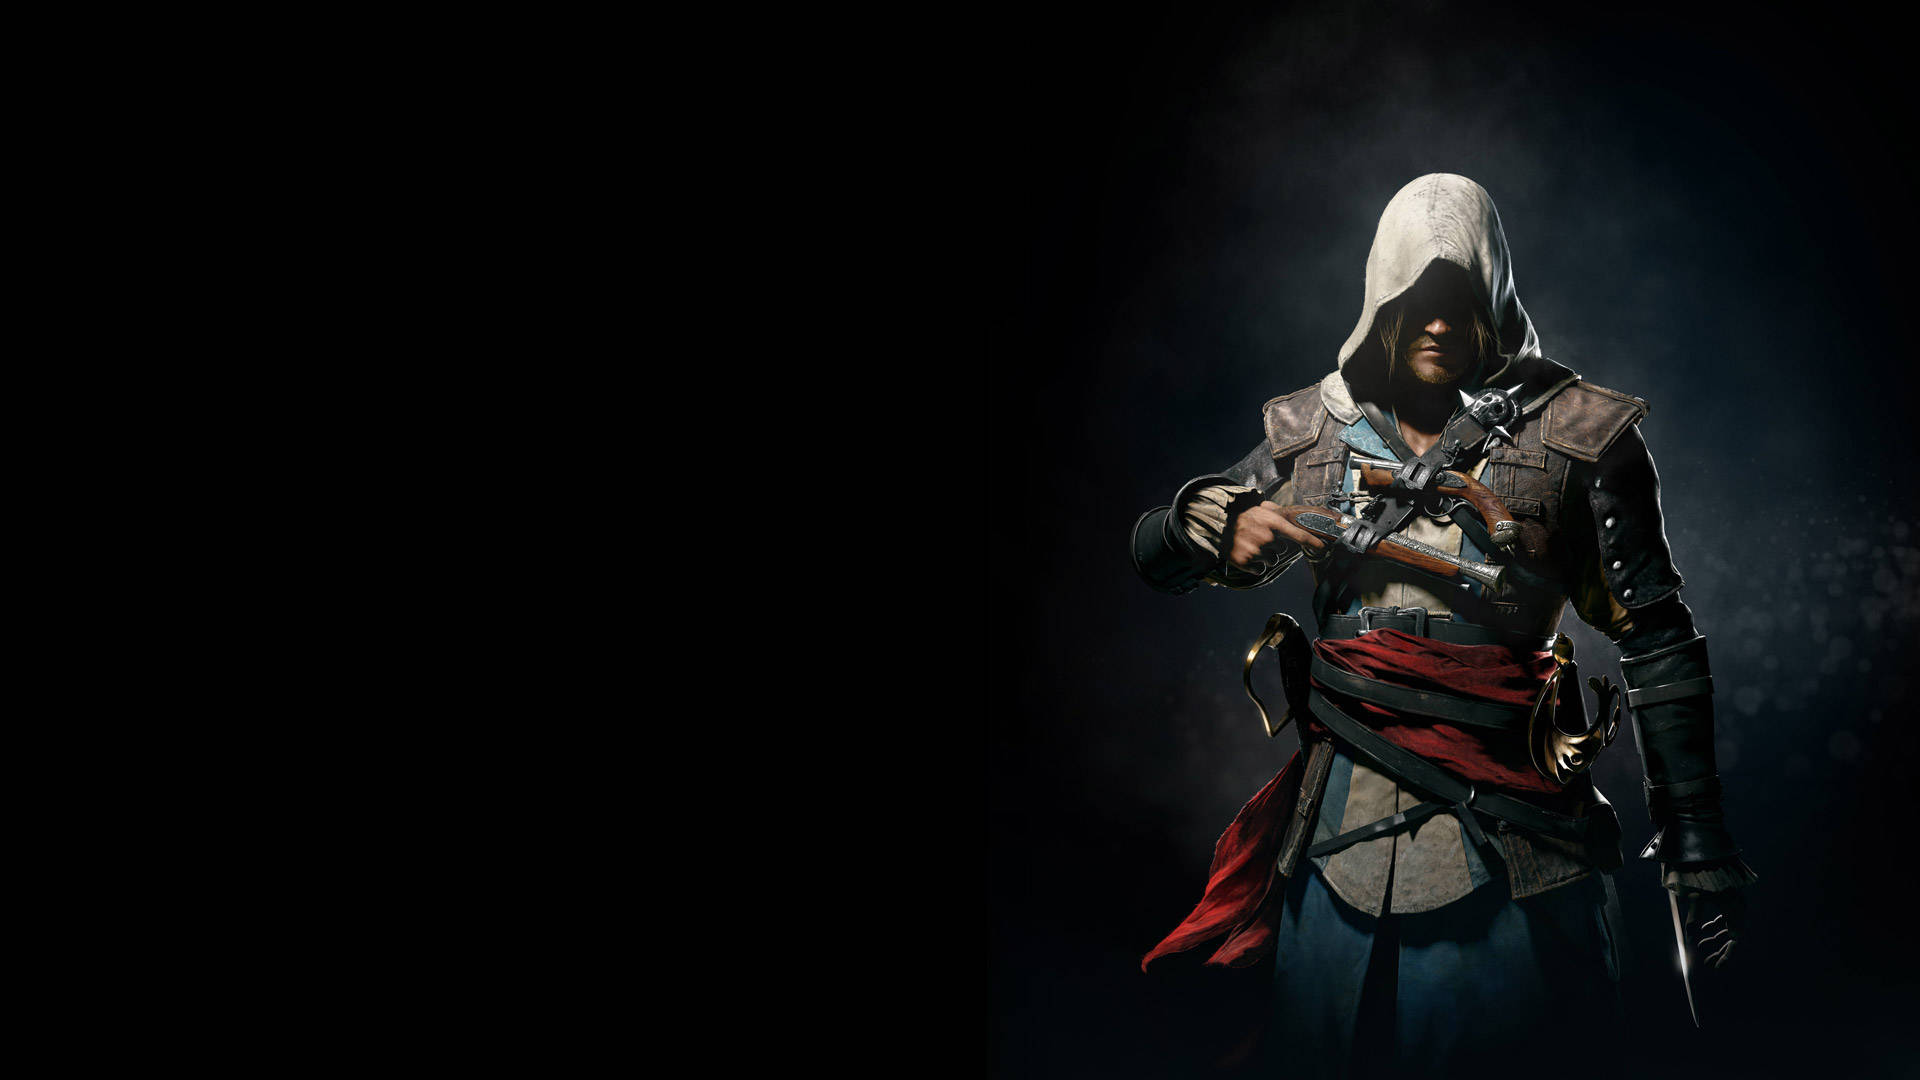 Gothic Assassin's Creed Black Flag Character Background